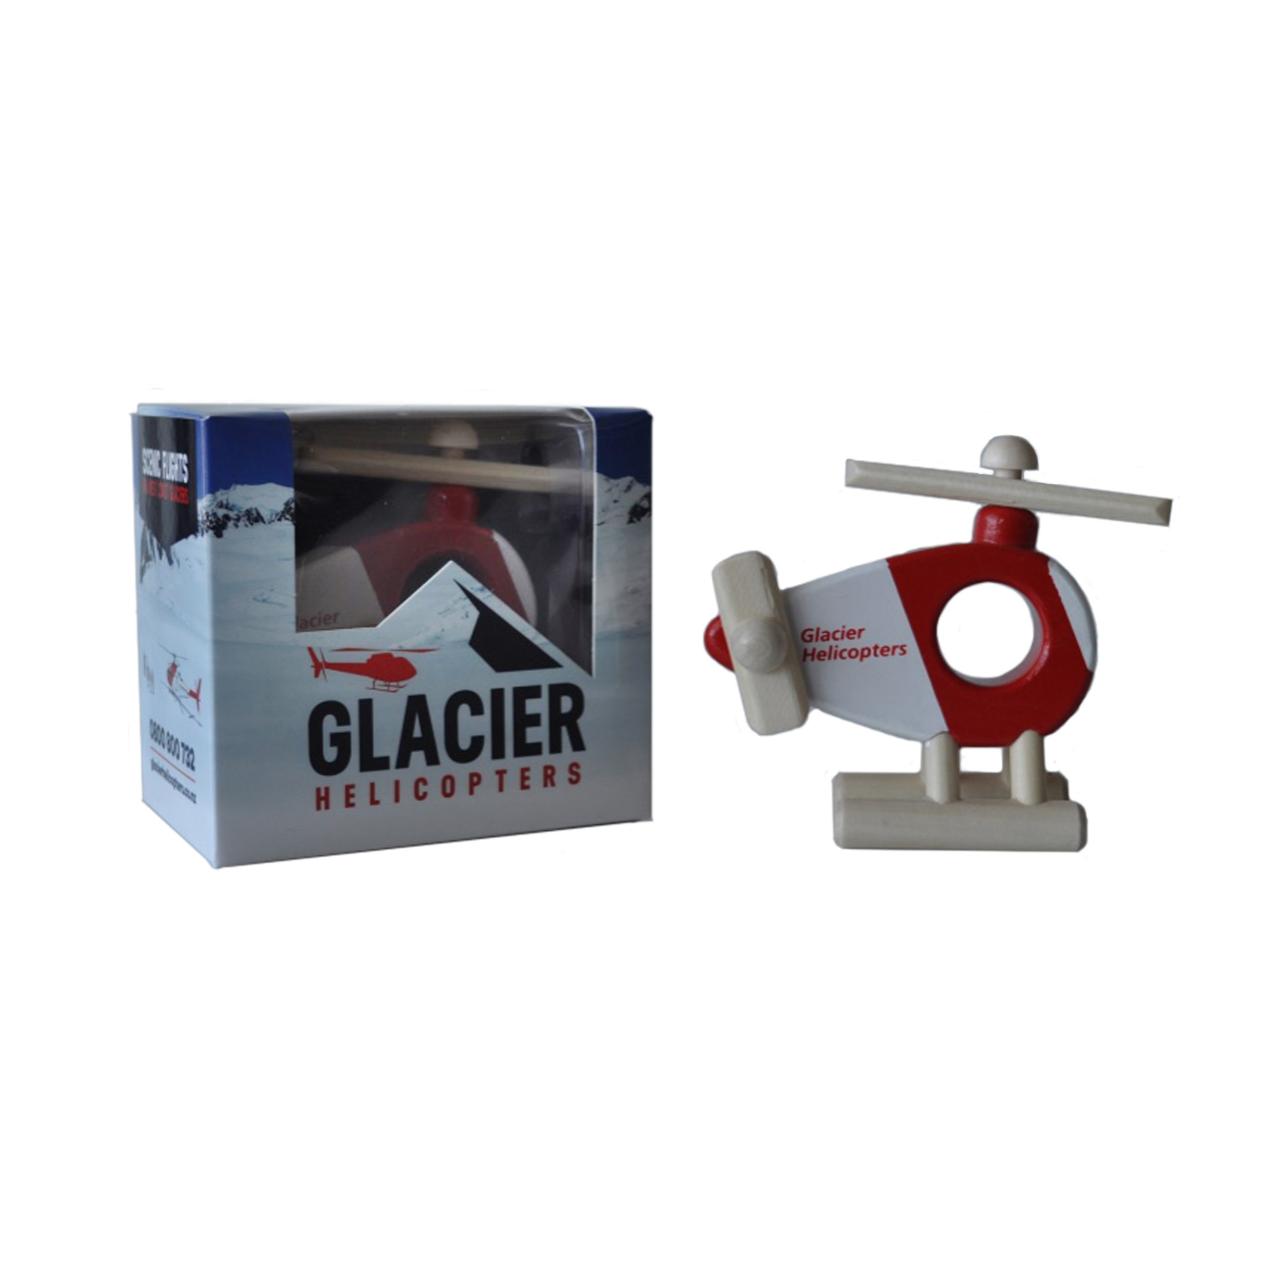 Glacier Helicopters Toy Helicopter